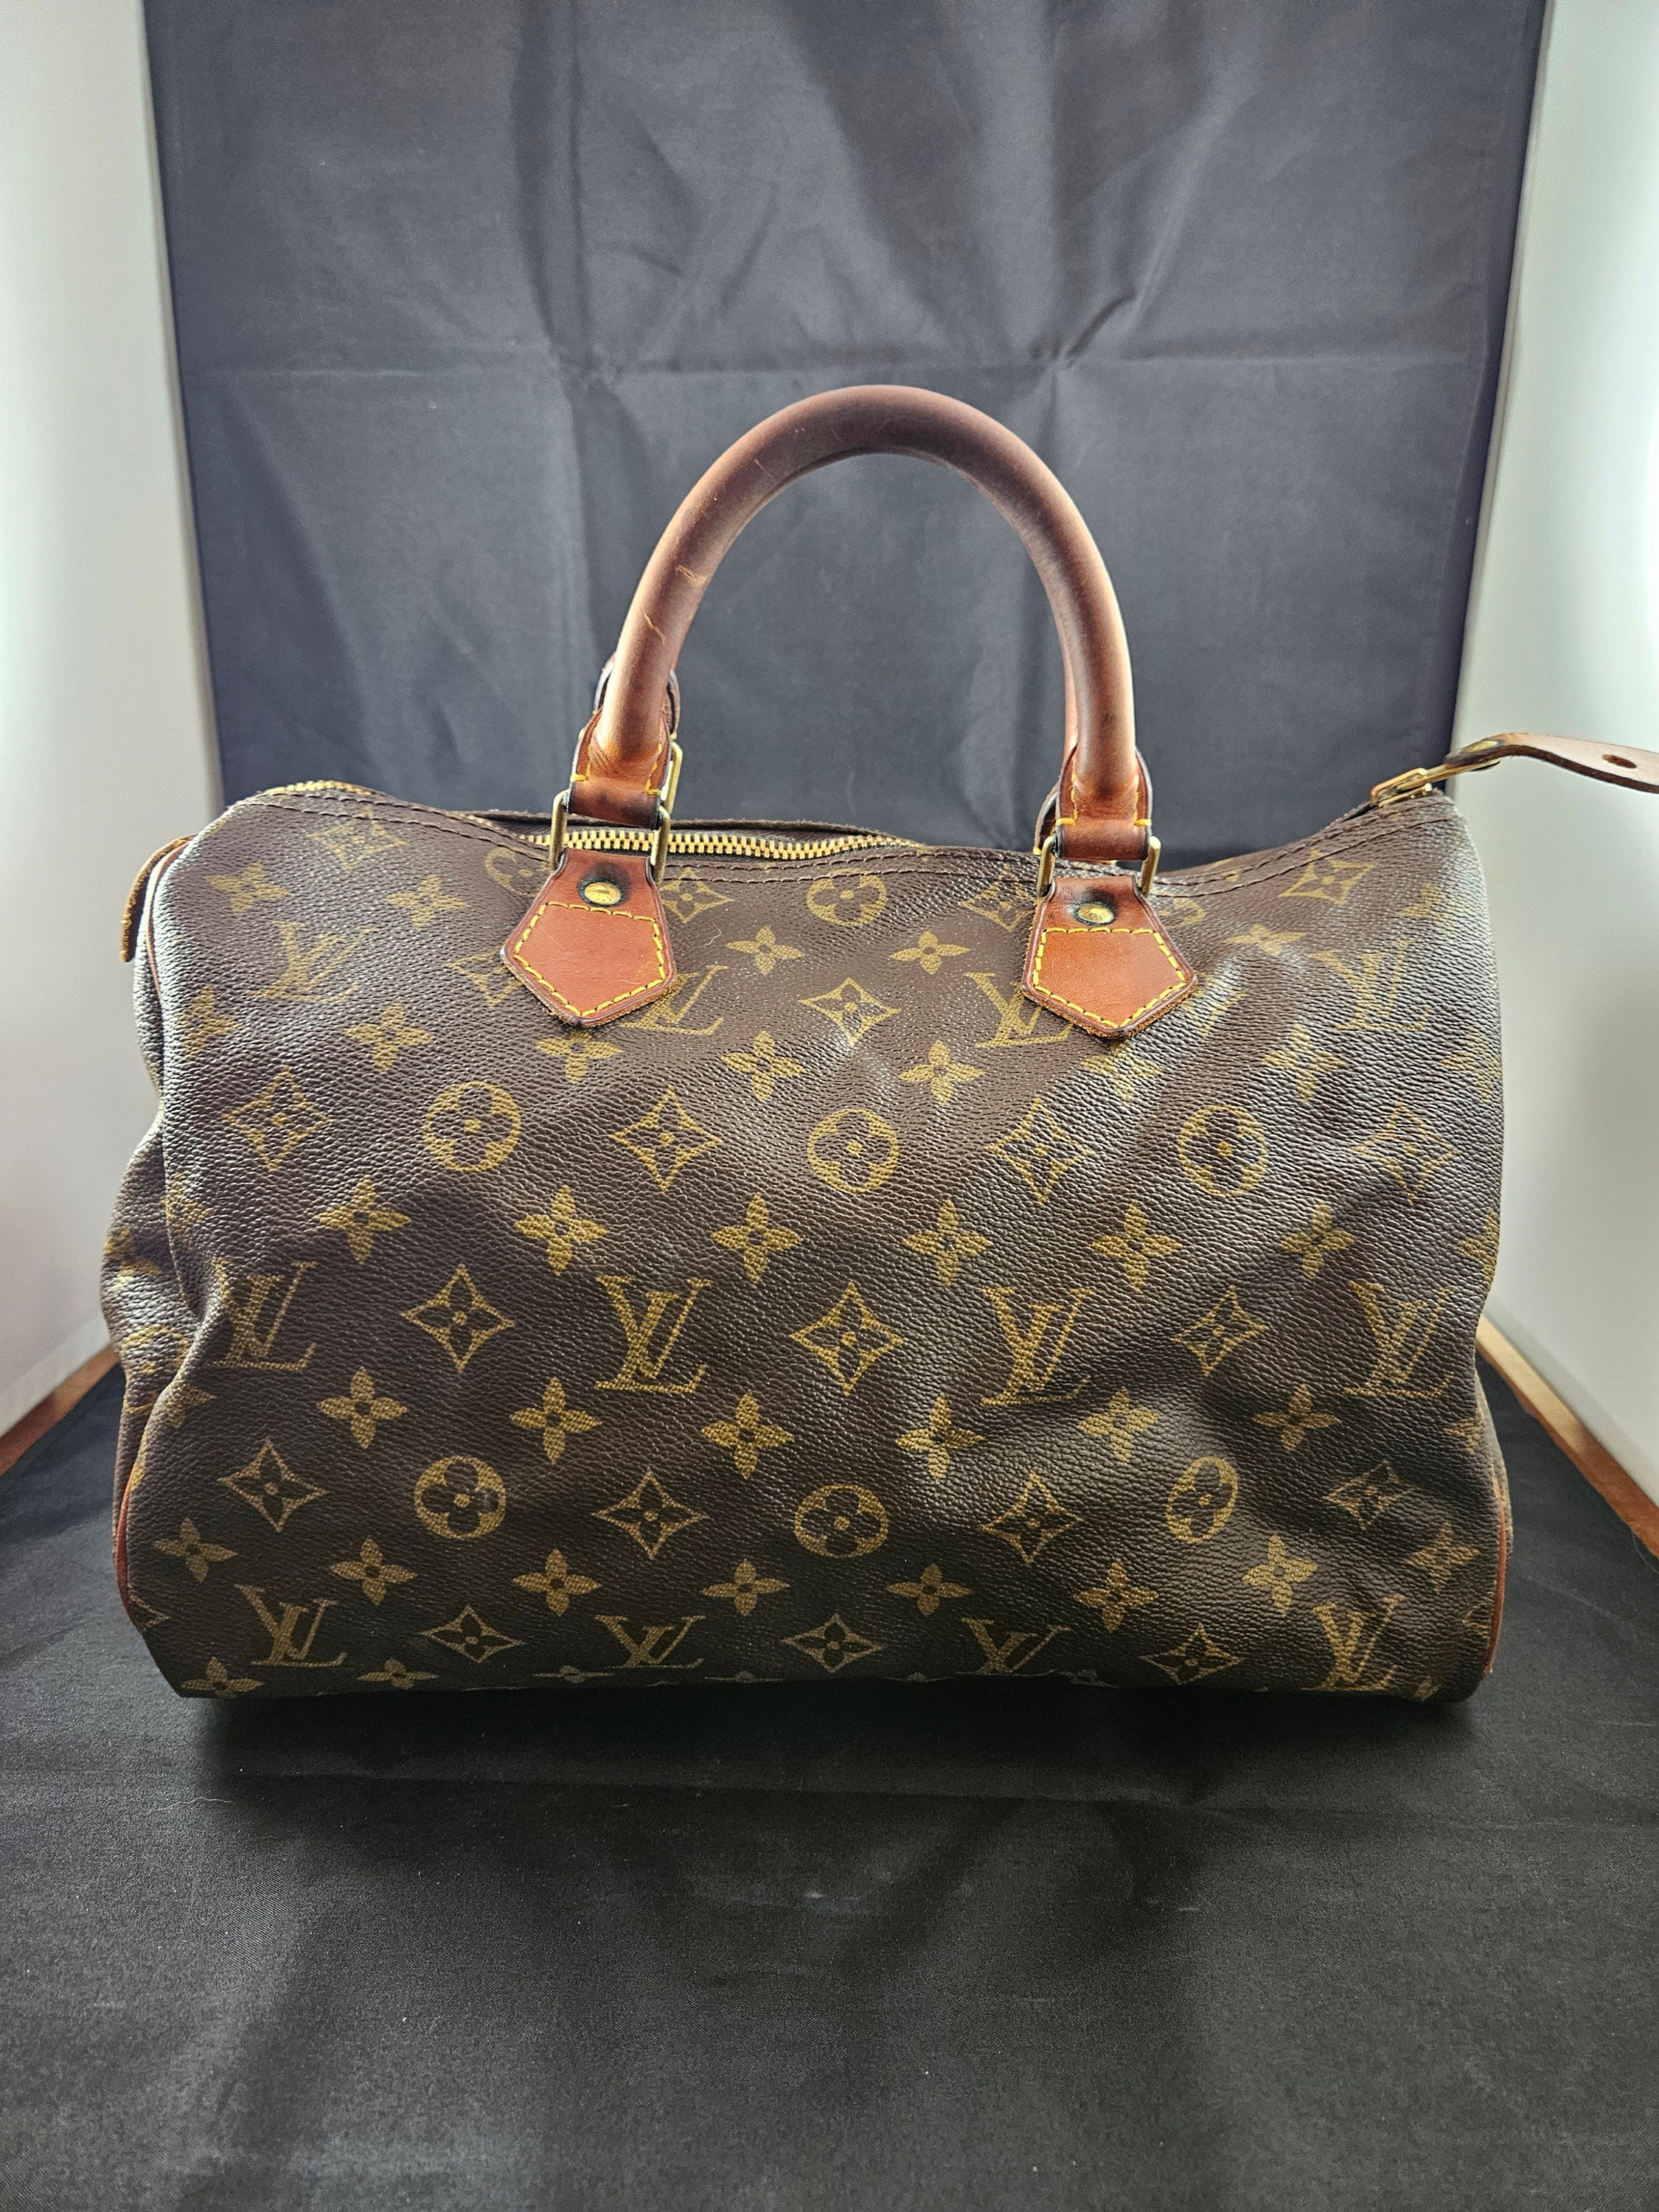 Satin Pillow Luxury Bag Shaper For Louis Vuitton Speedy 25/30/35/40  (Burgundy) - More colors available